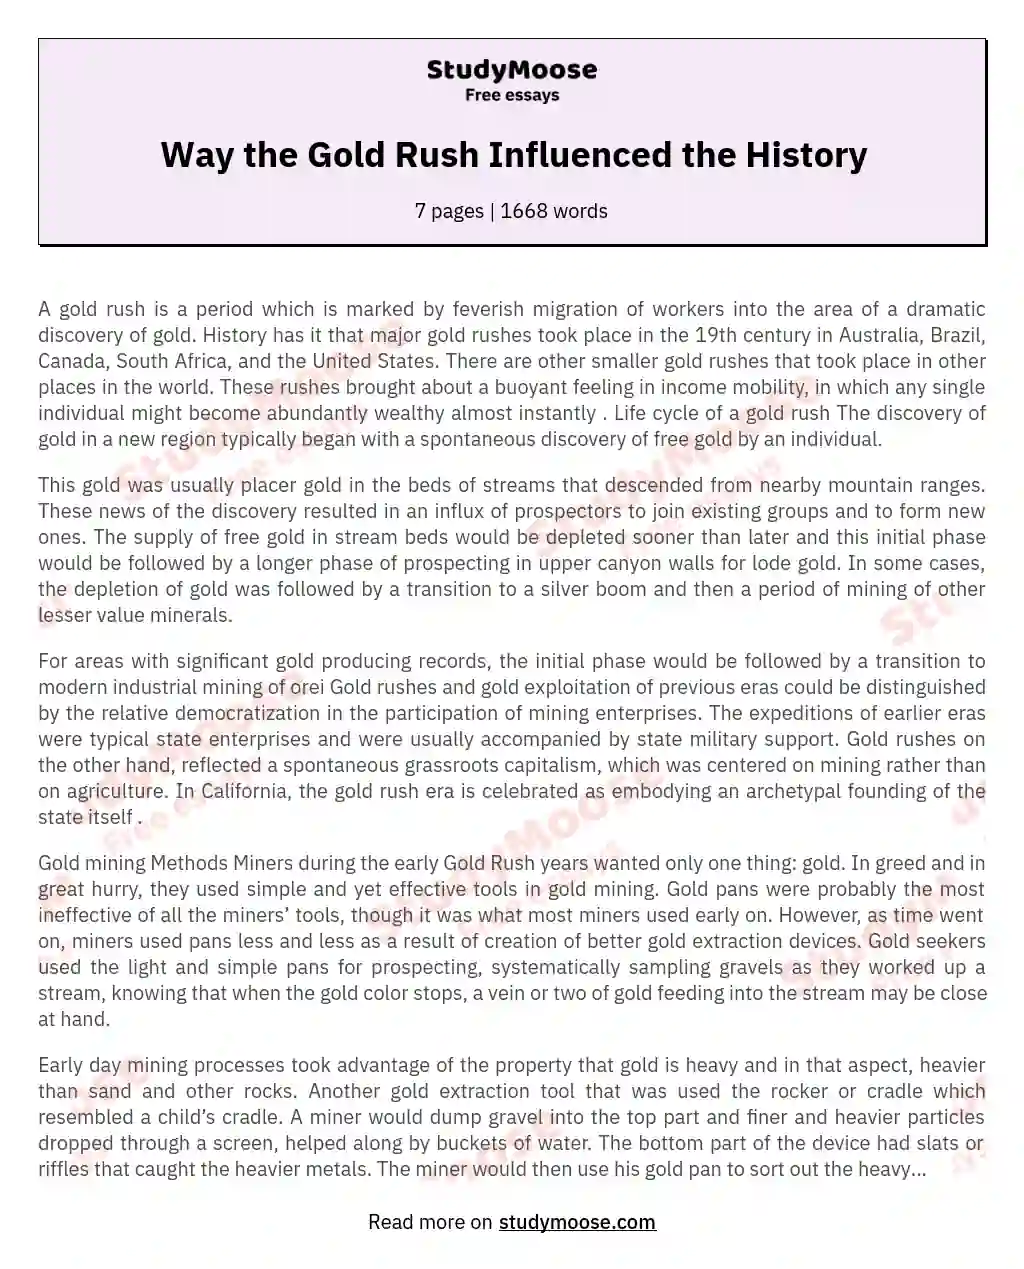 Way the Gold Rush Influenced the History essay